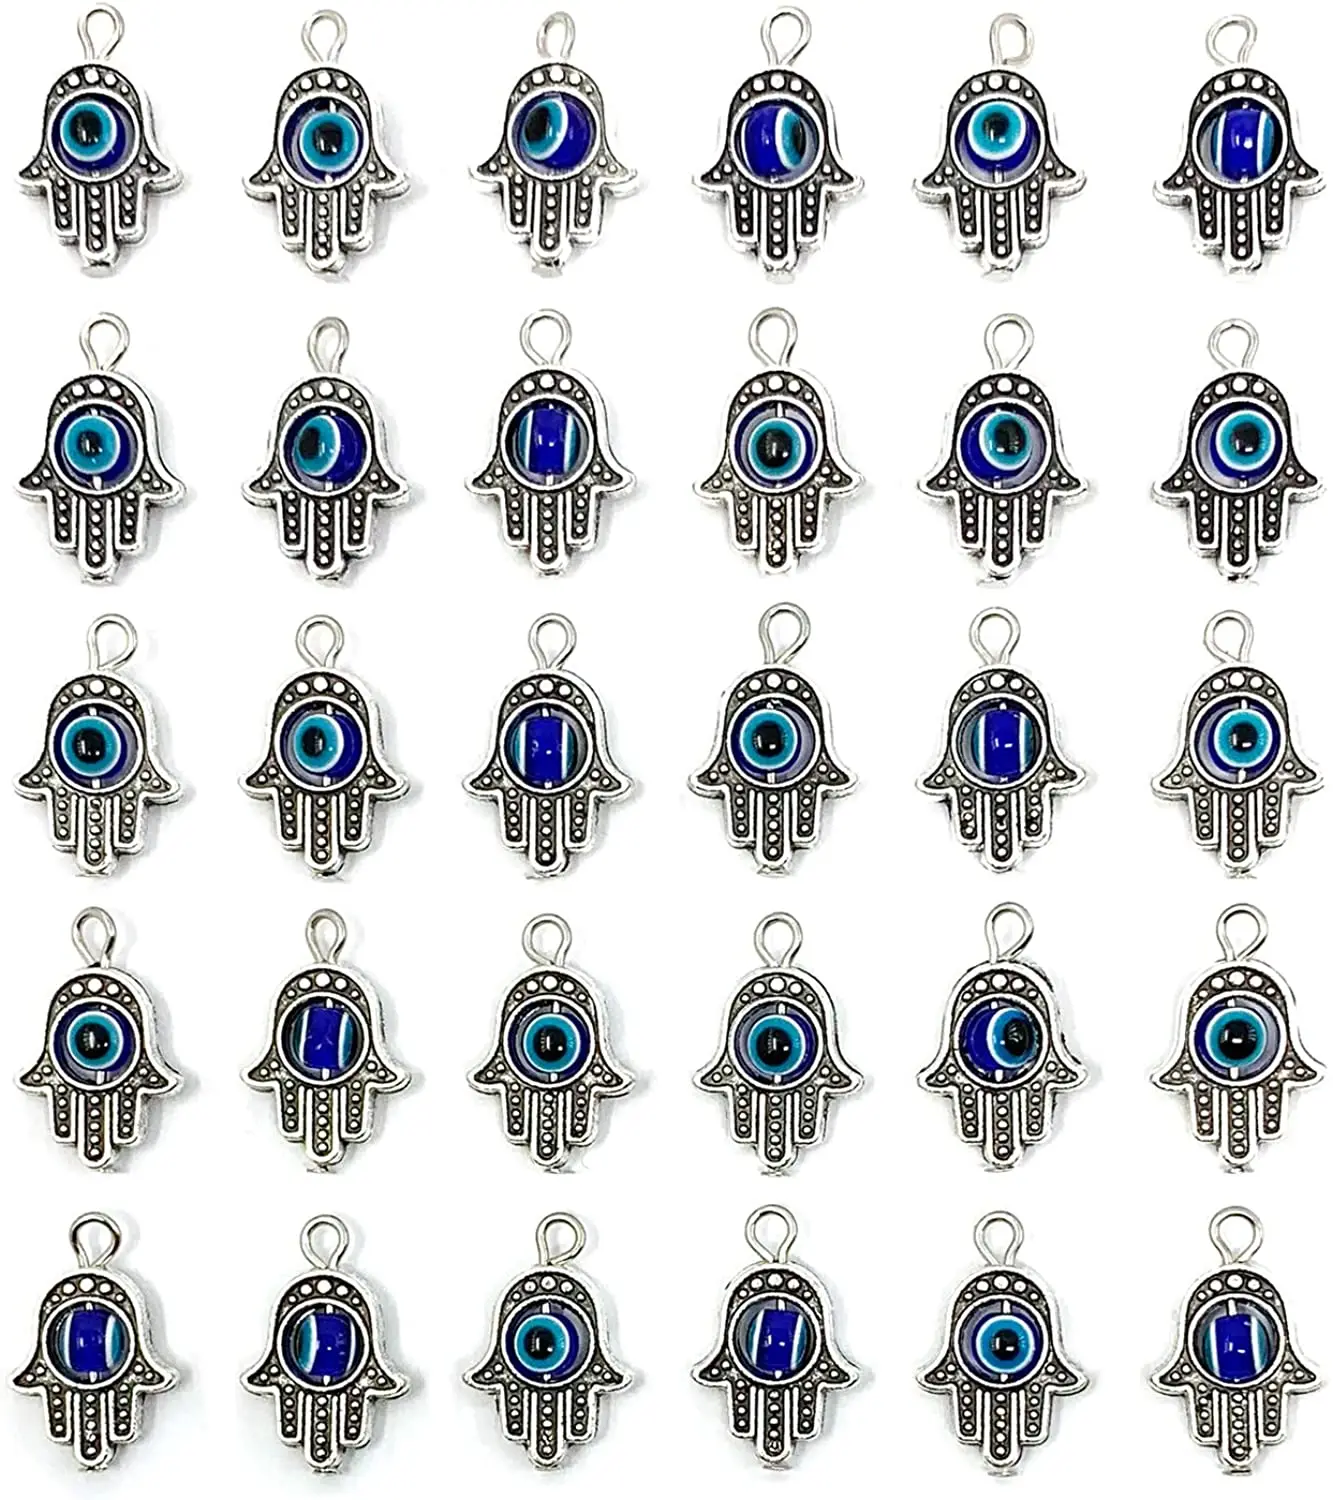 

30PCS Antique Silver Hamsa Hand Evil Eye Bead of Fatima Charms for Jewelry Making Findings DIY Necklace Bracelet Resin Charms